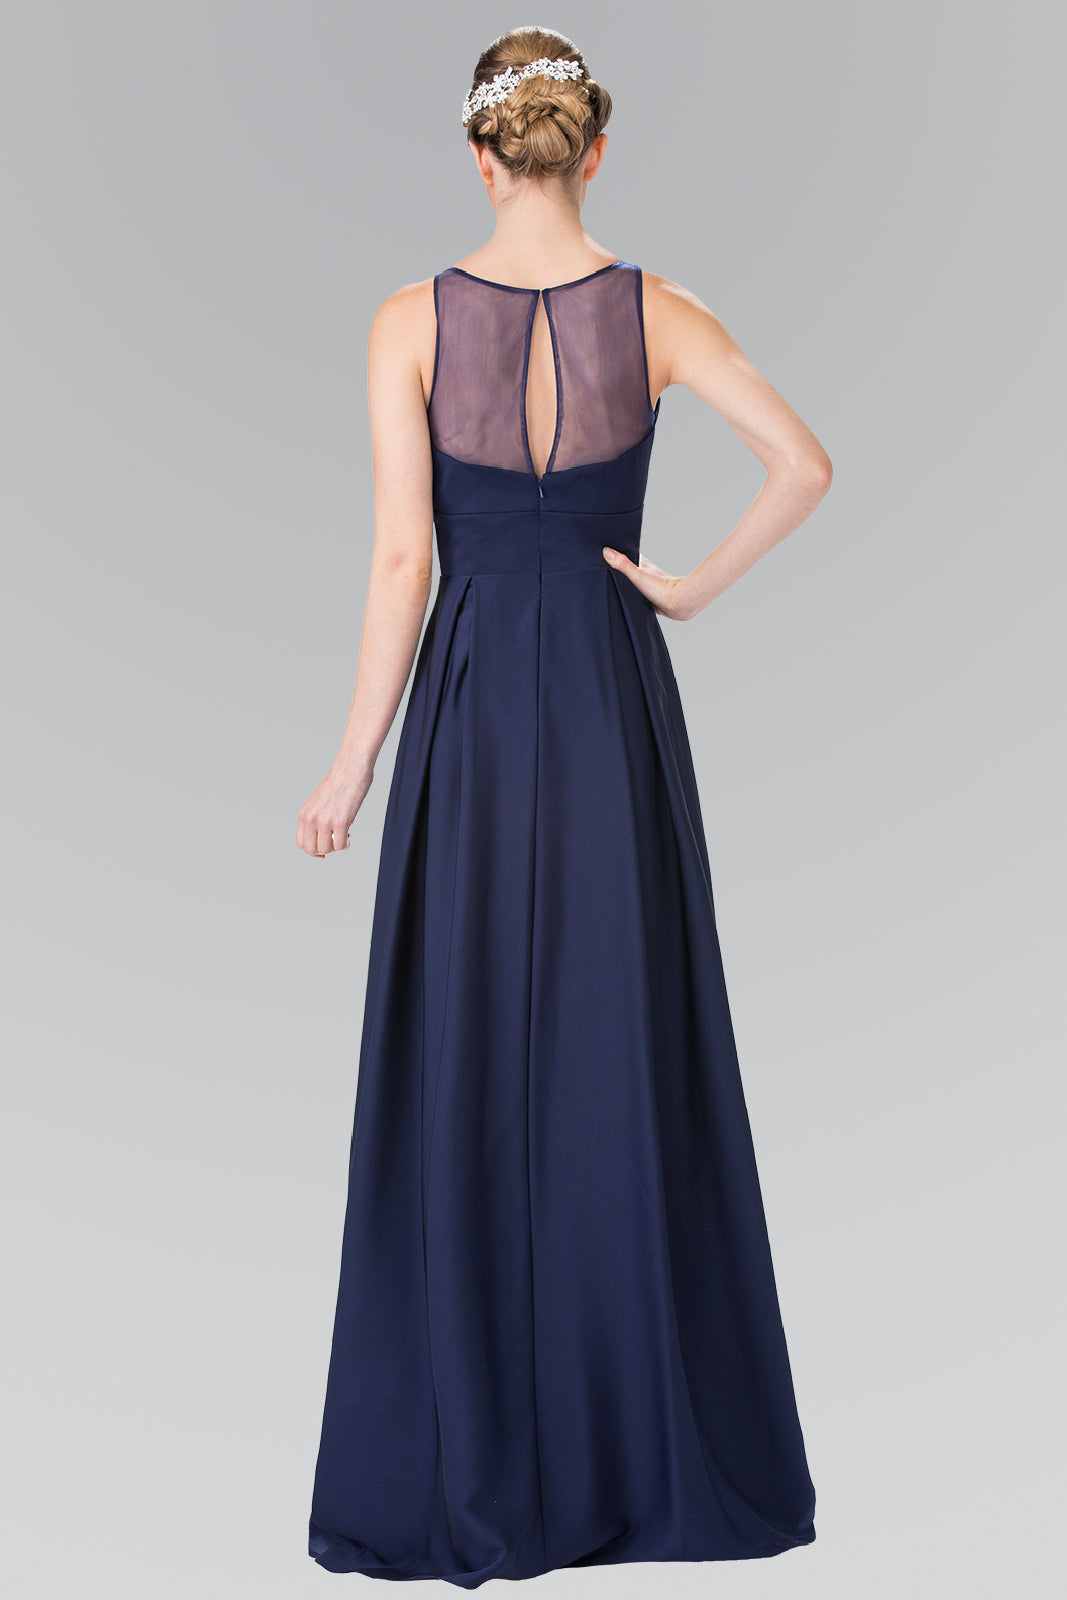 Prom Dress with Notched Scoop and Long Skirt GLGL2365-PROM-smcfashion.com